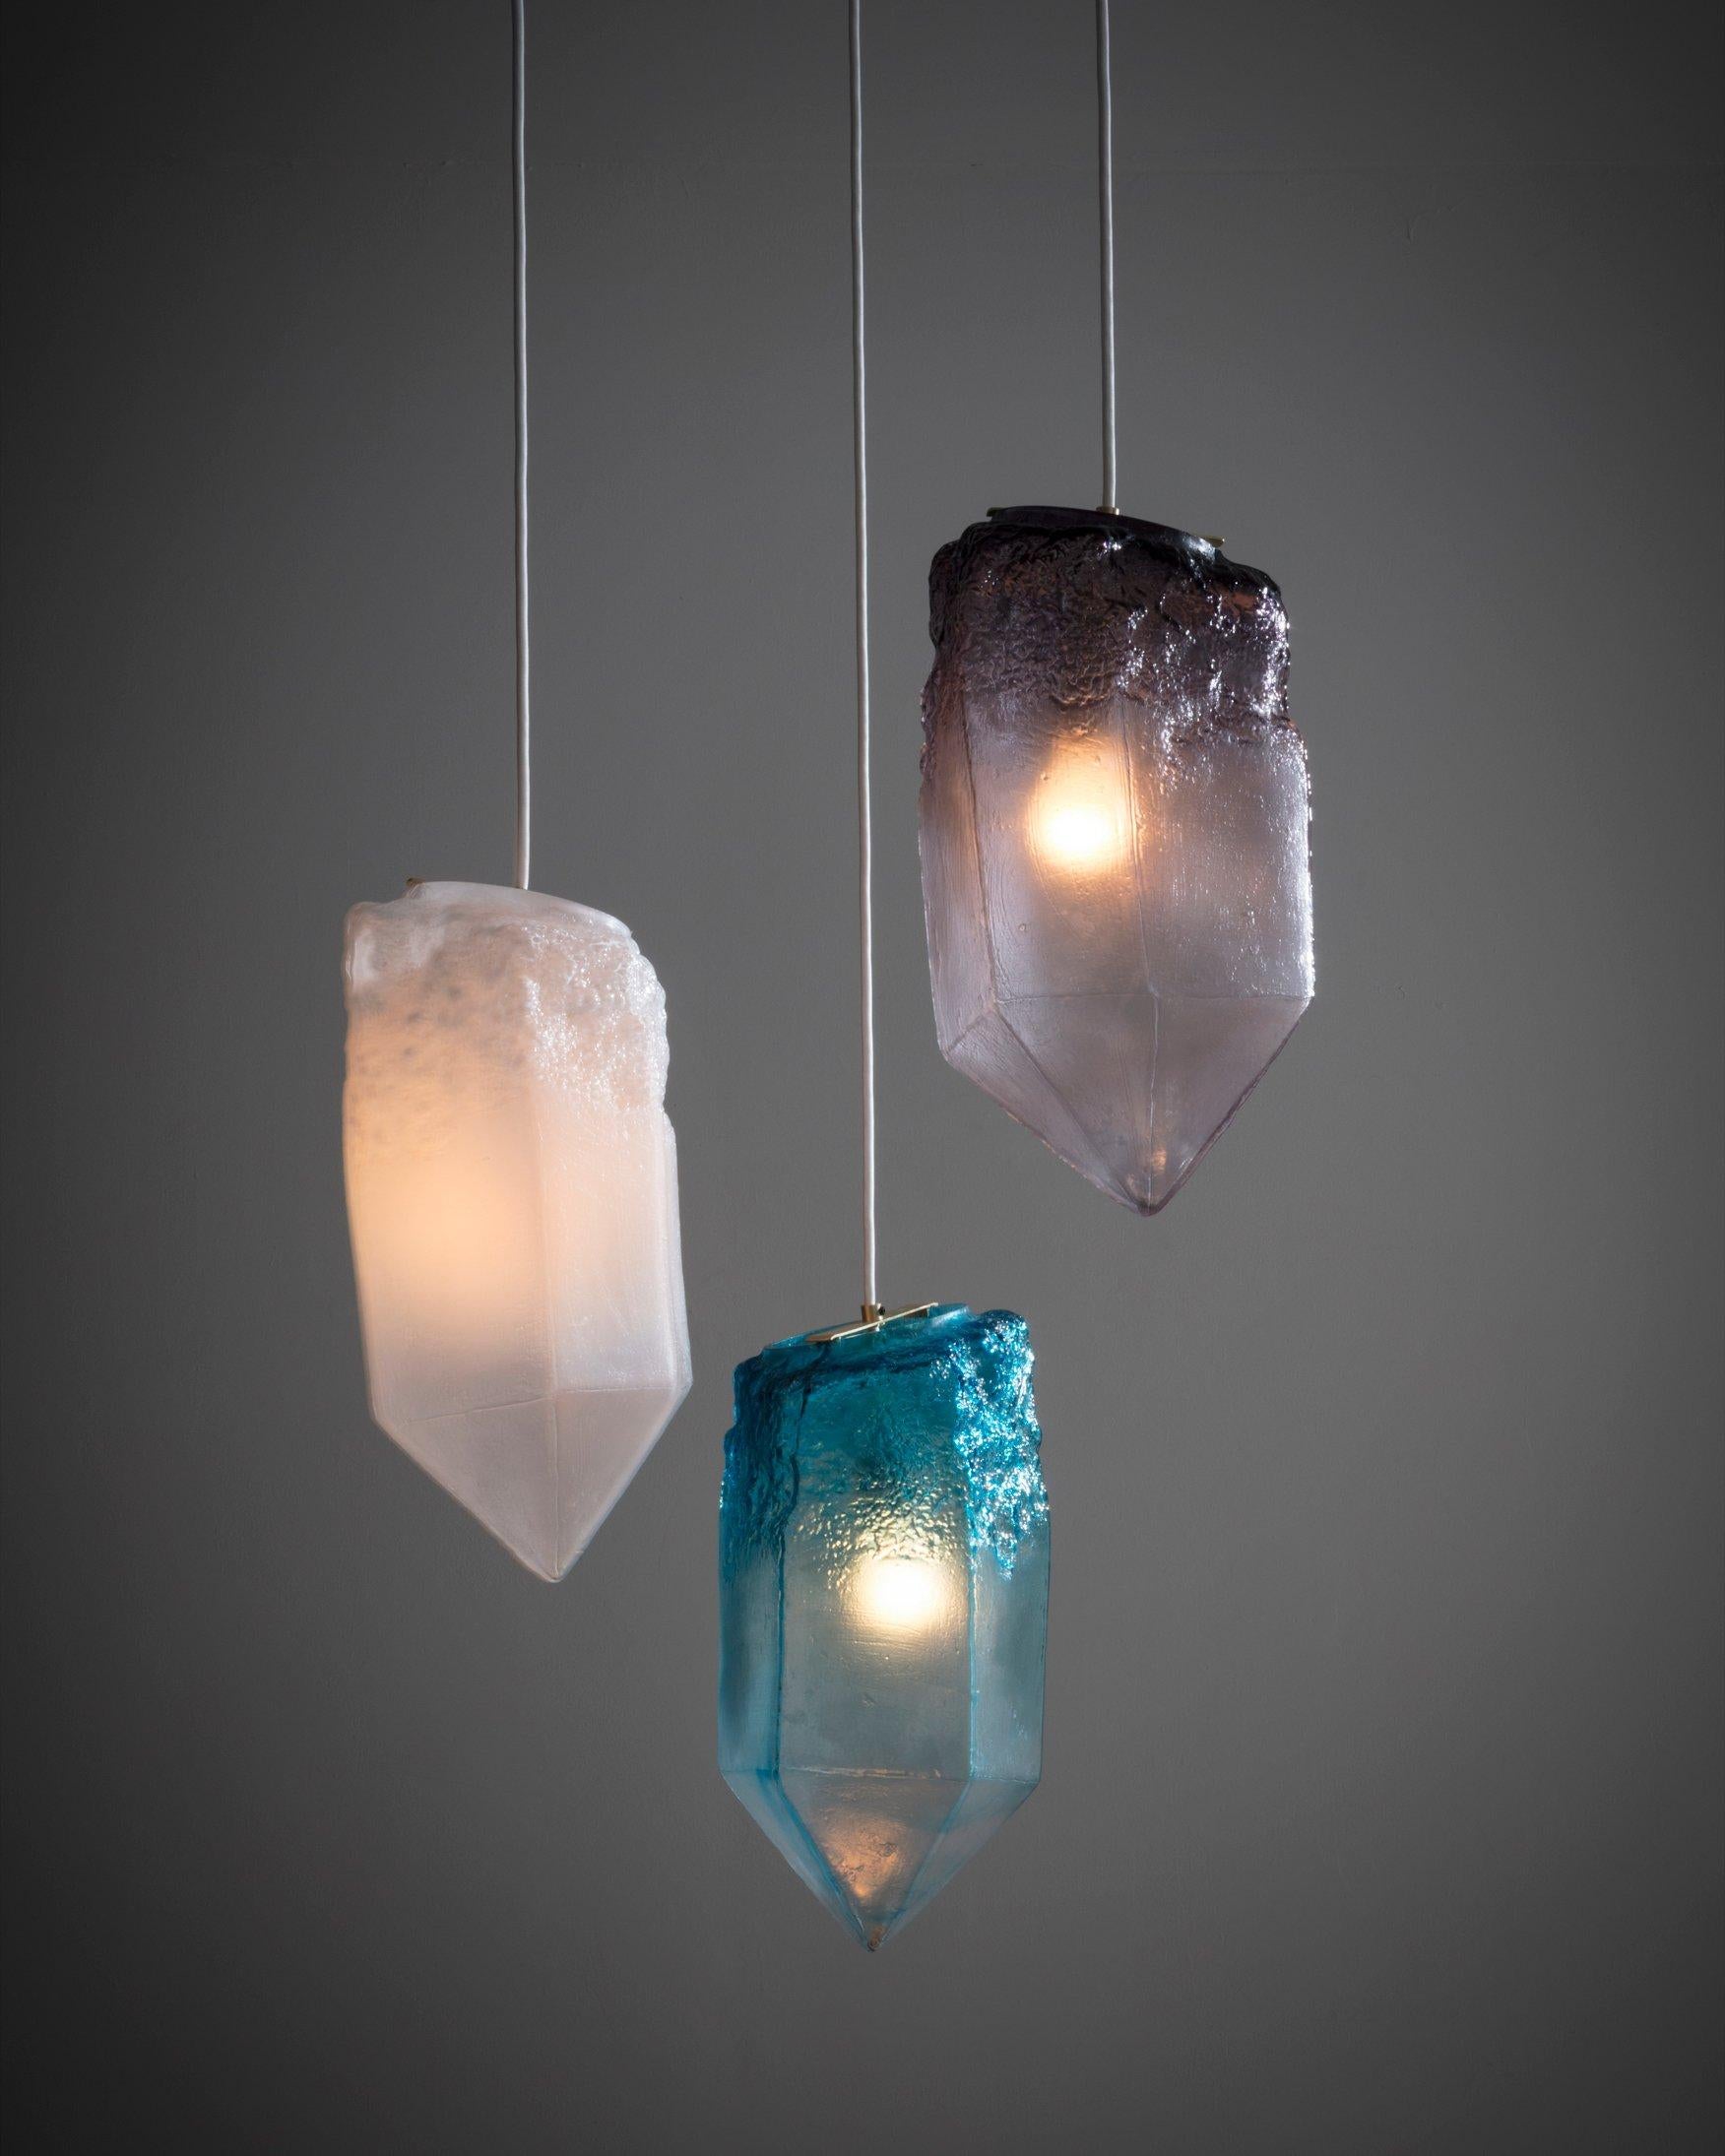 Crystal illuminated sculptural pendant in hand blown glass. Designed and made by Jeff Zimmerman, USA.

Due to the handmade nature of this piece, color, size, and shape may vary slightly.